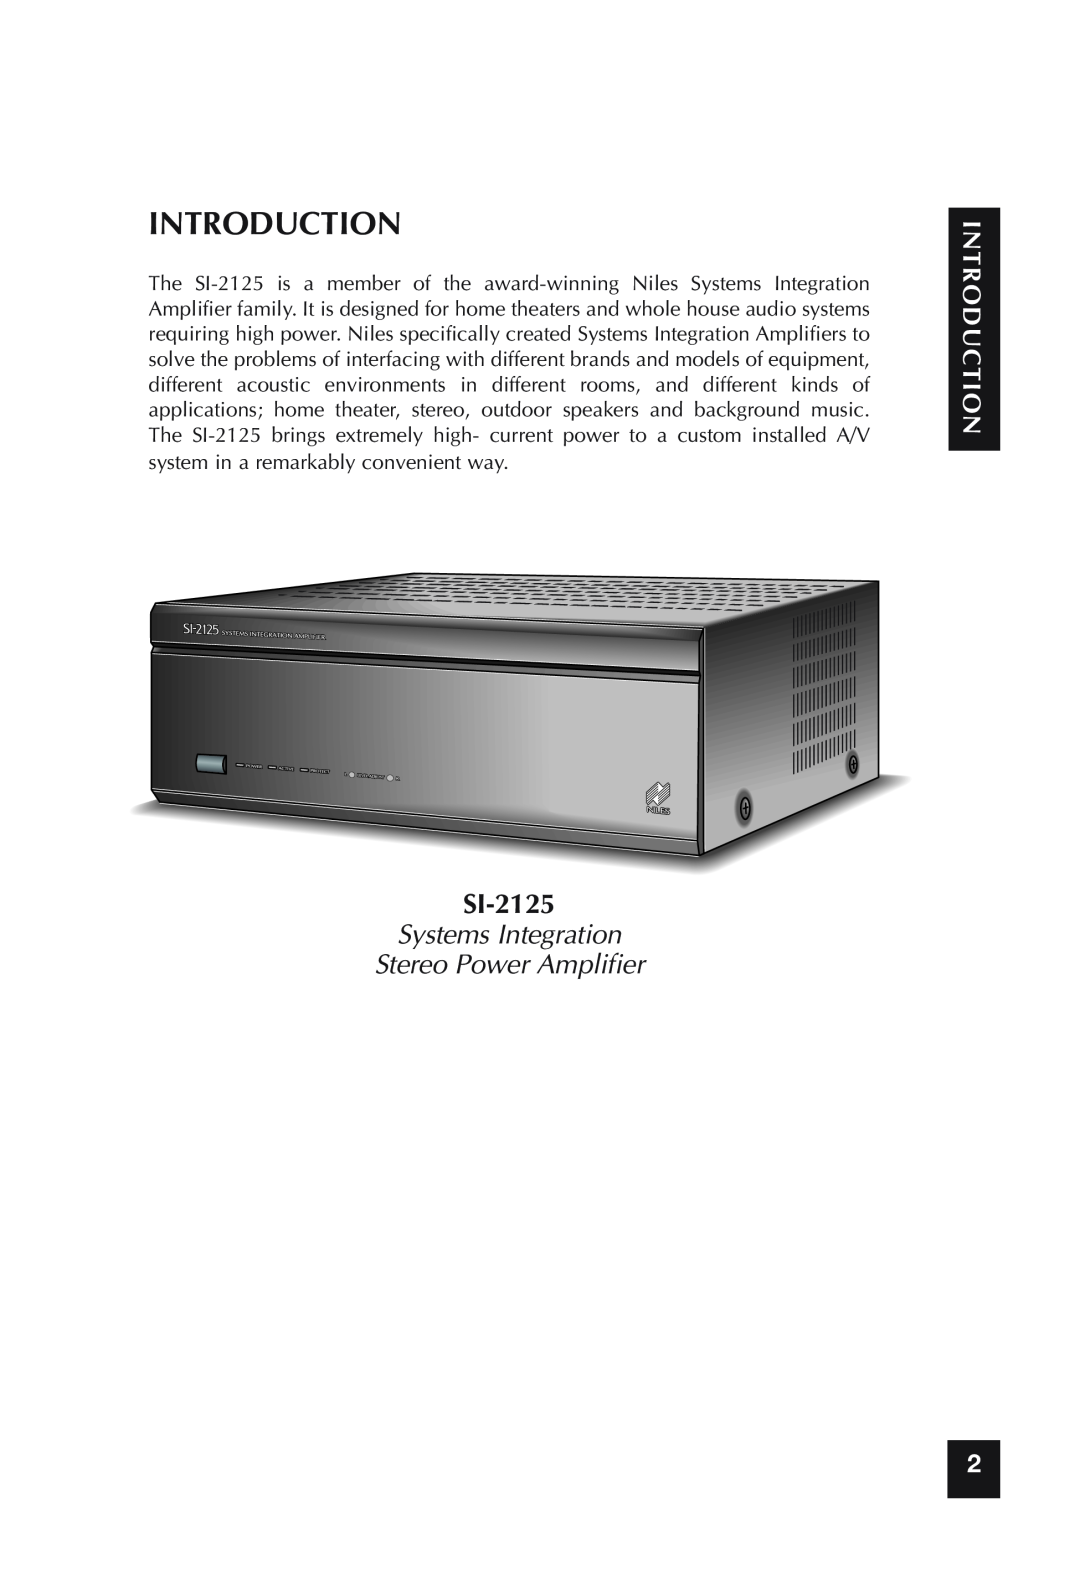 Niles Audio SI-2125 specifications Introduction, Systems Integration Stereo Power Amplifier 